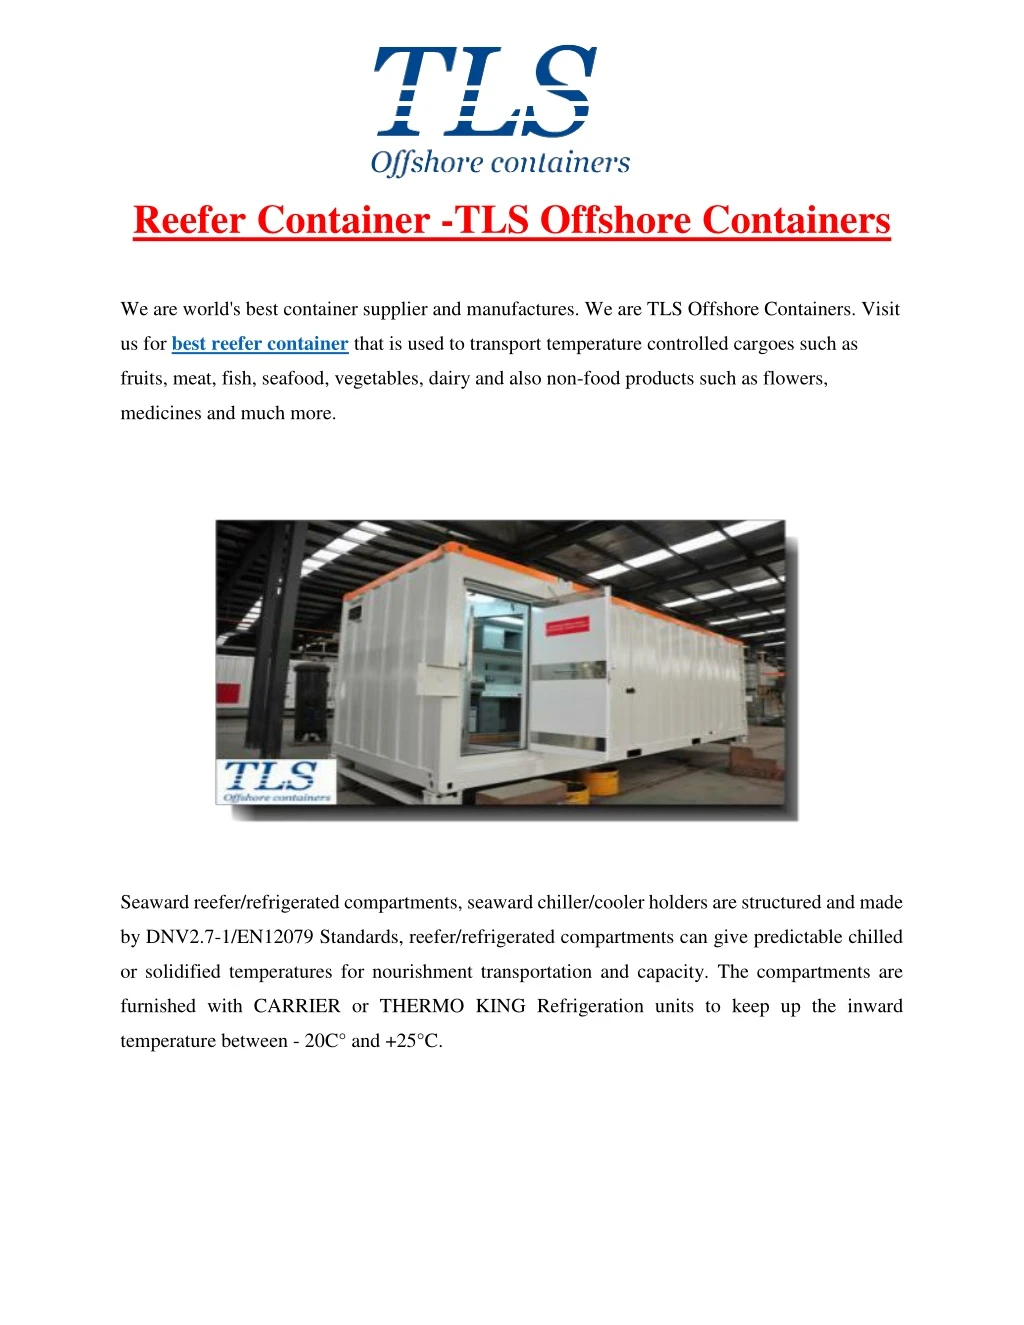 reefer container tls offshore containers